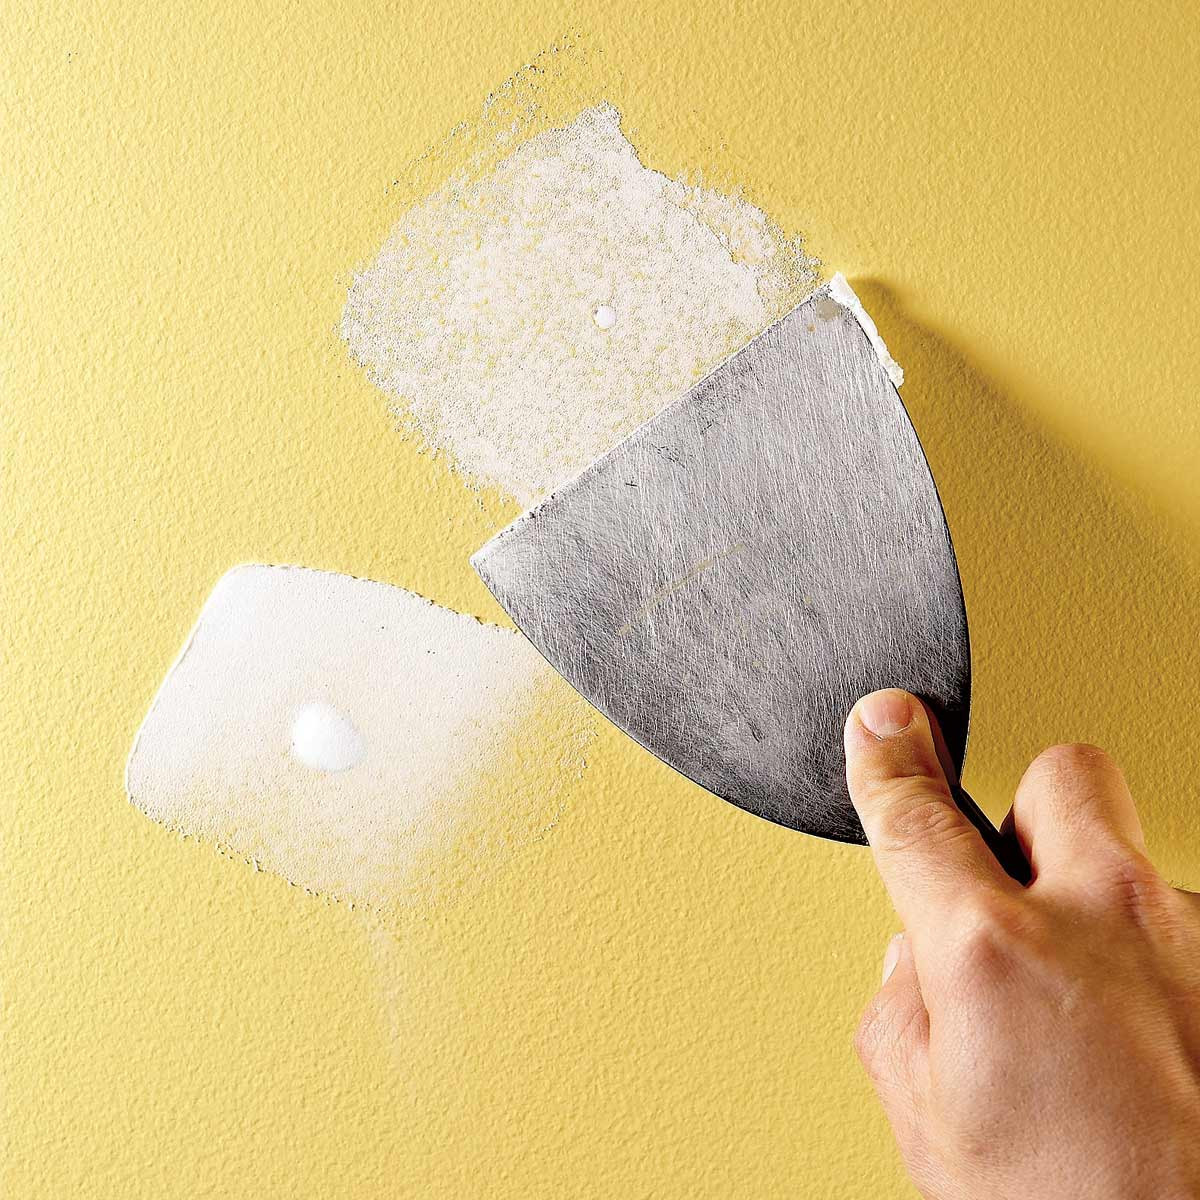 Patching a hole on the wall